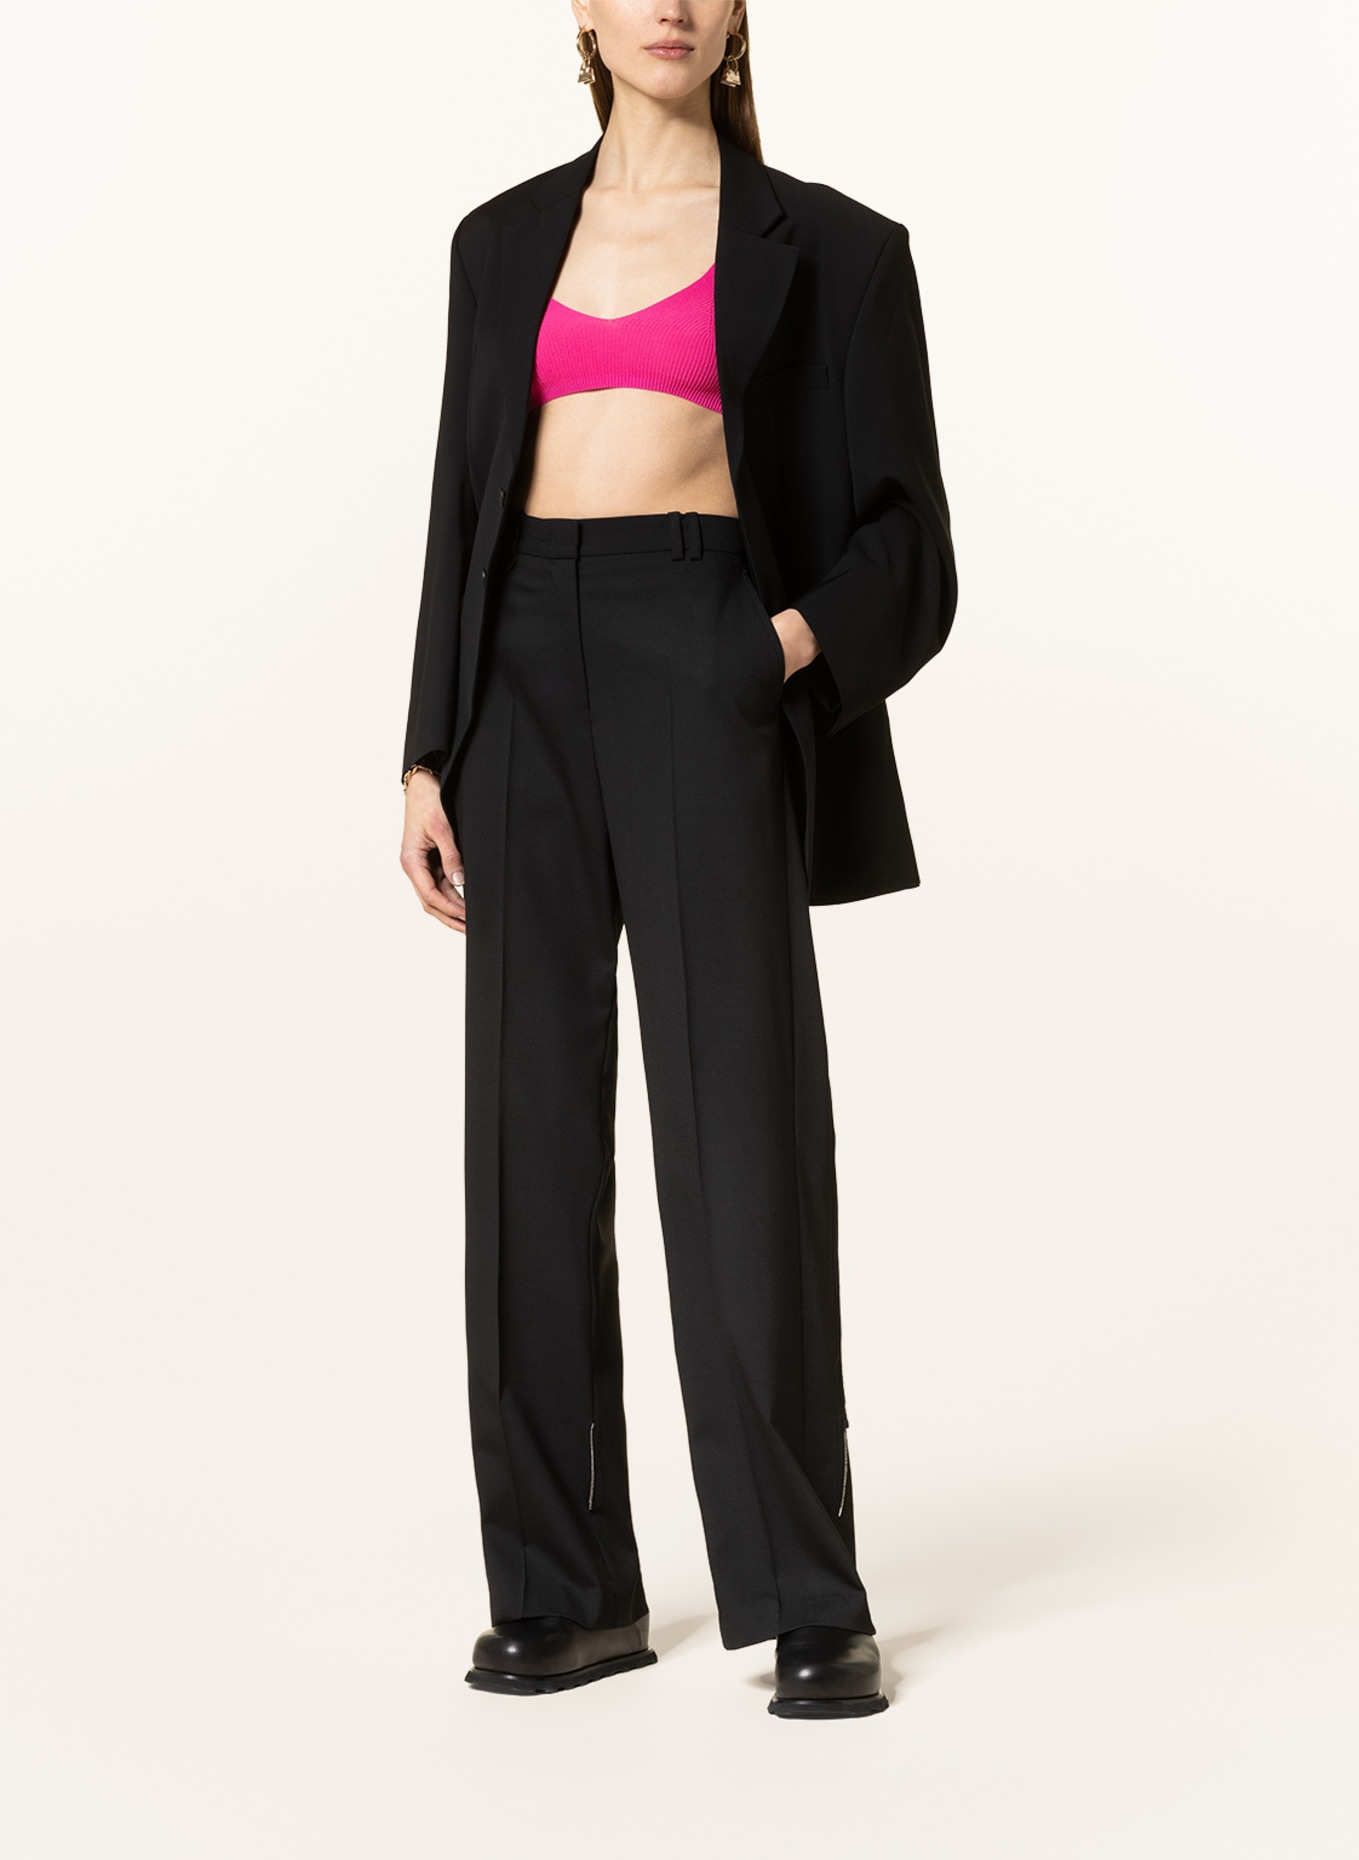 JACQUEMUS Cropped-Stricktop LE BANDEAU VALENSOLE, Farbe: PINK (Bild 2)